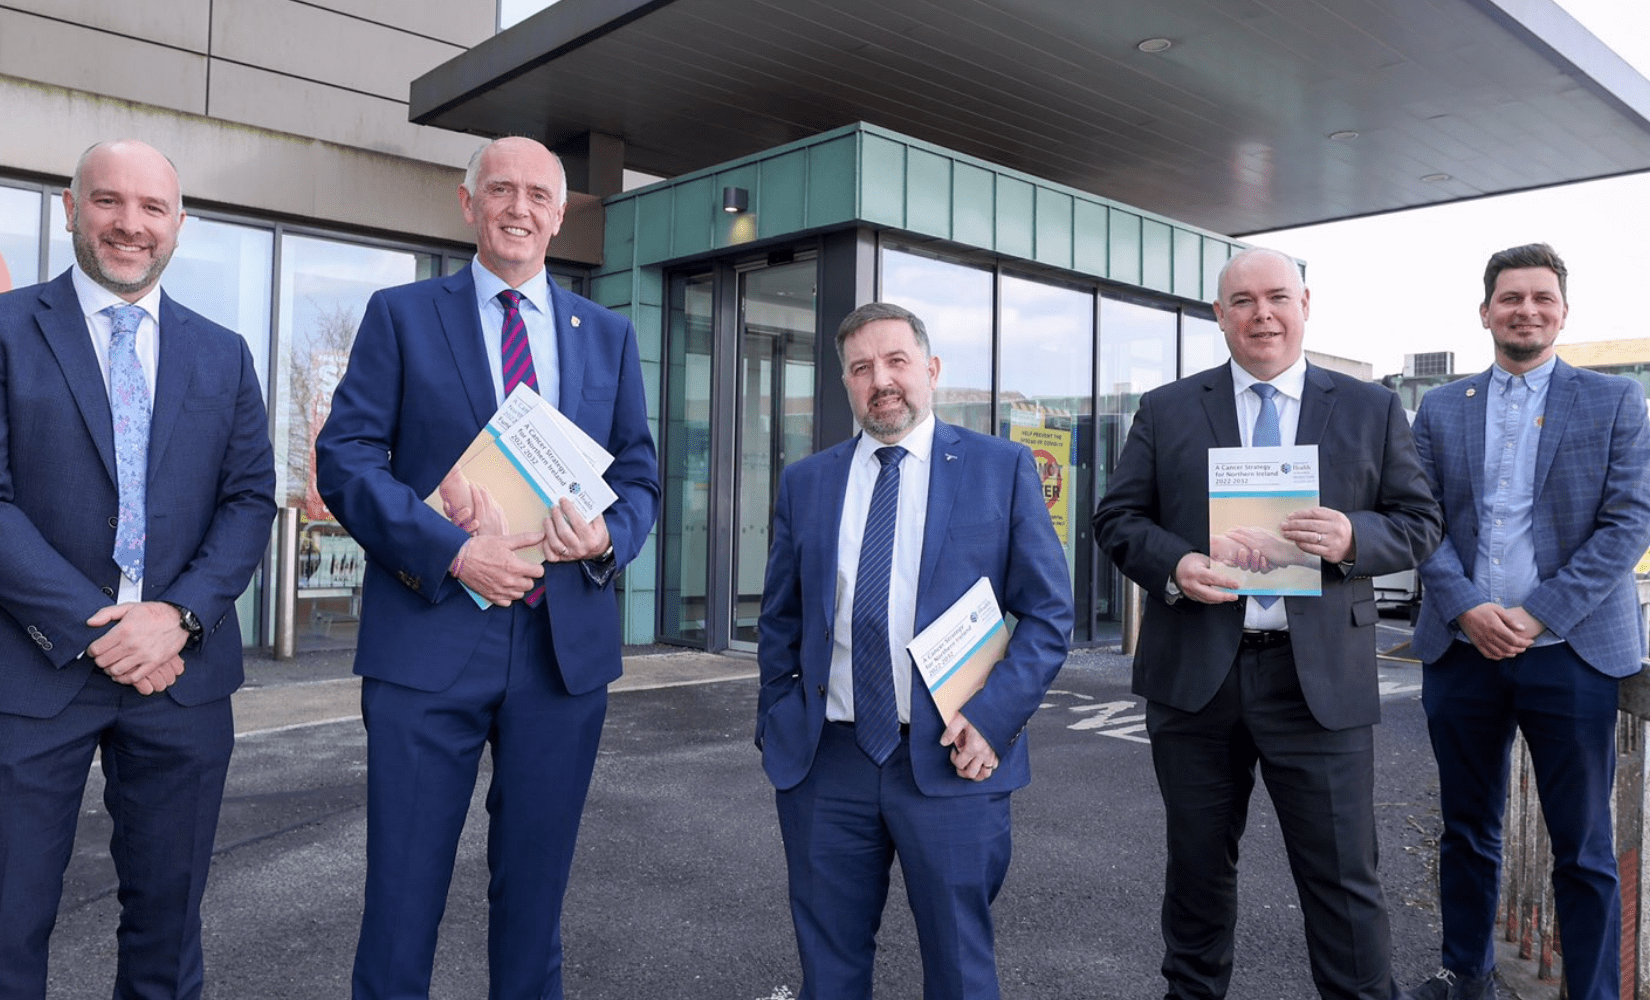 Cancer Focus NI warmly welcomes the new Cancer Strategy but disappointed by lack of Budget